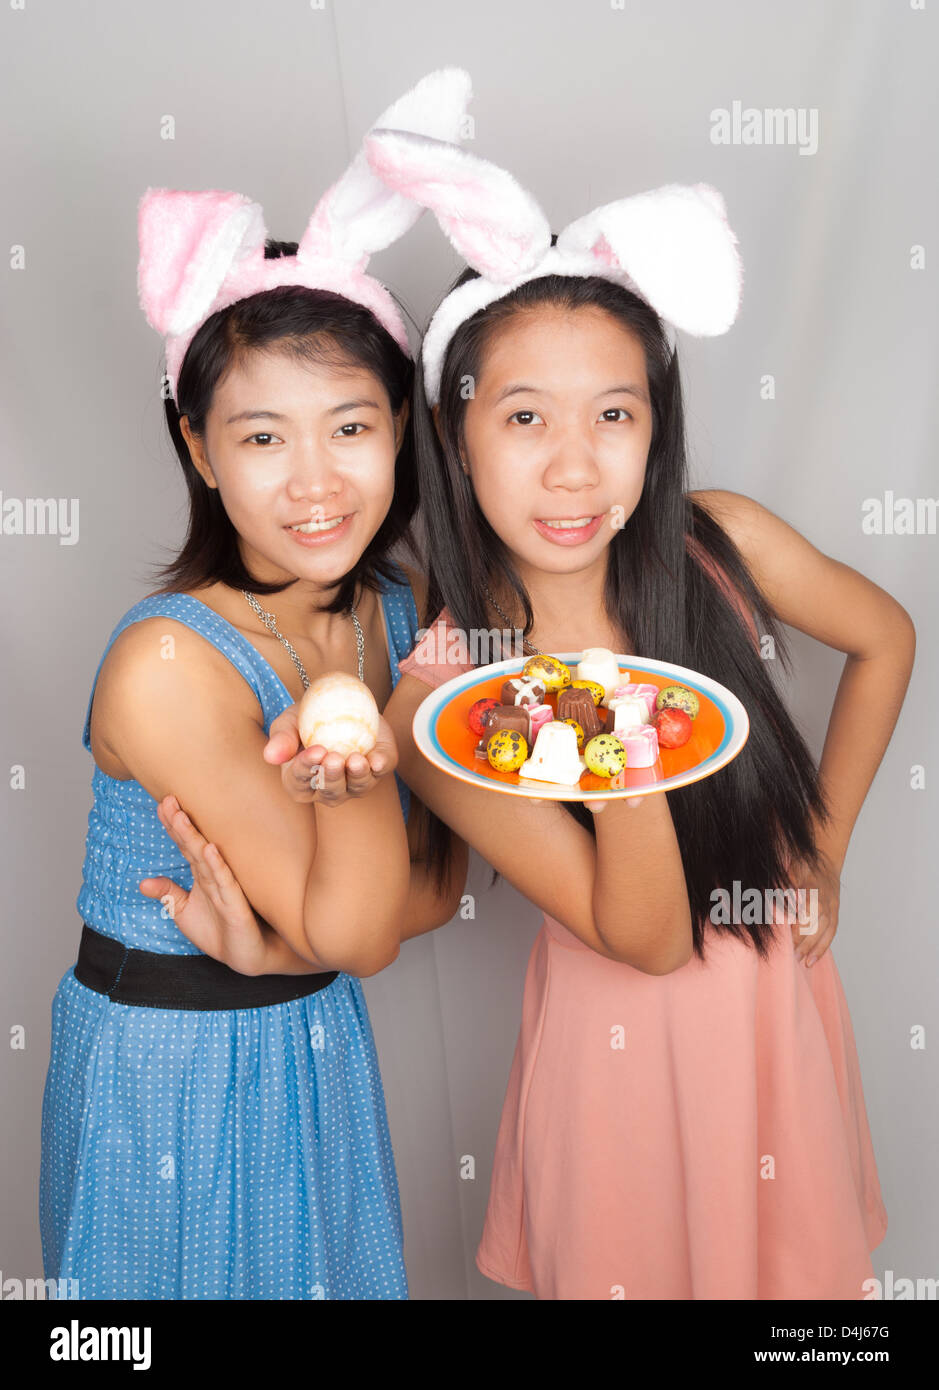 Cute Asian bunny girls hold plate of Easter eggs, chocolate and rock egg. Stock Photo